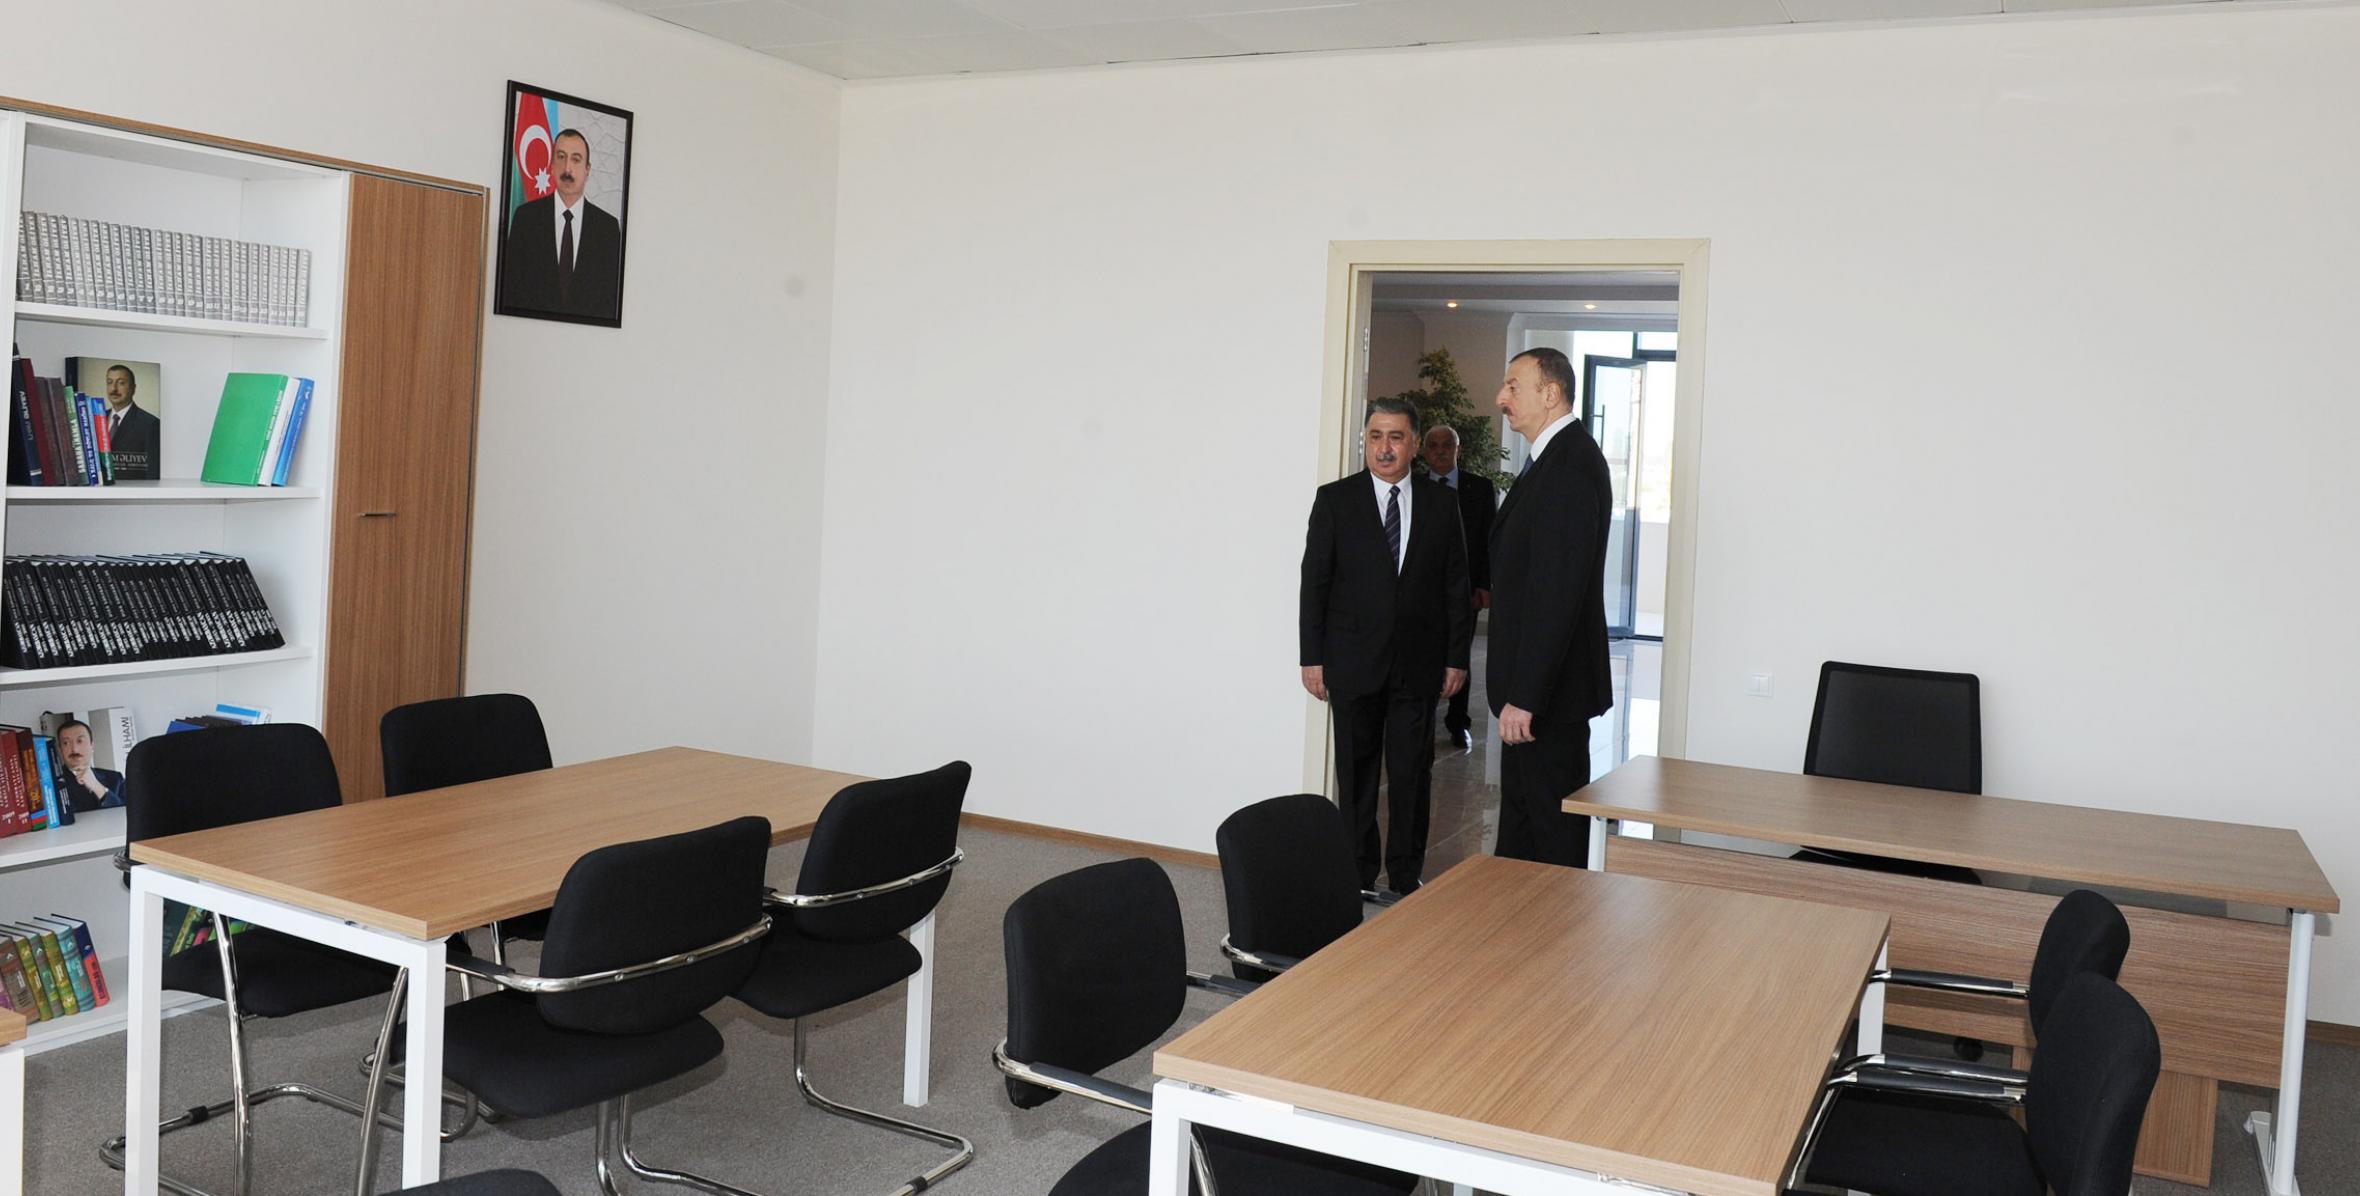 Ilham Aliyev attended the opening ceremony of a new office building of the Agdash District Executive Authority